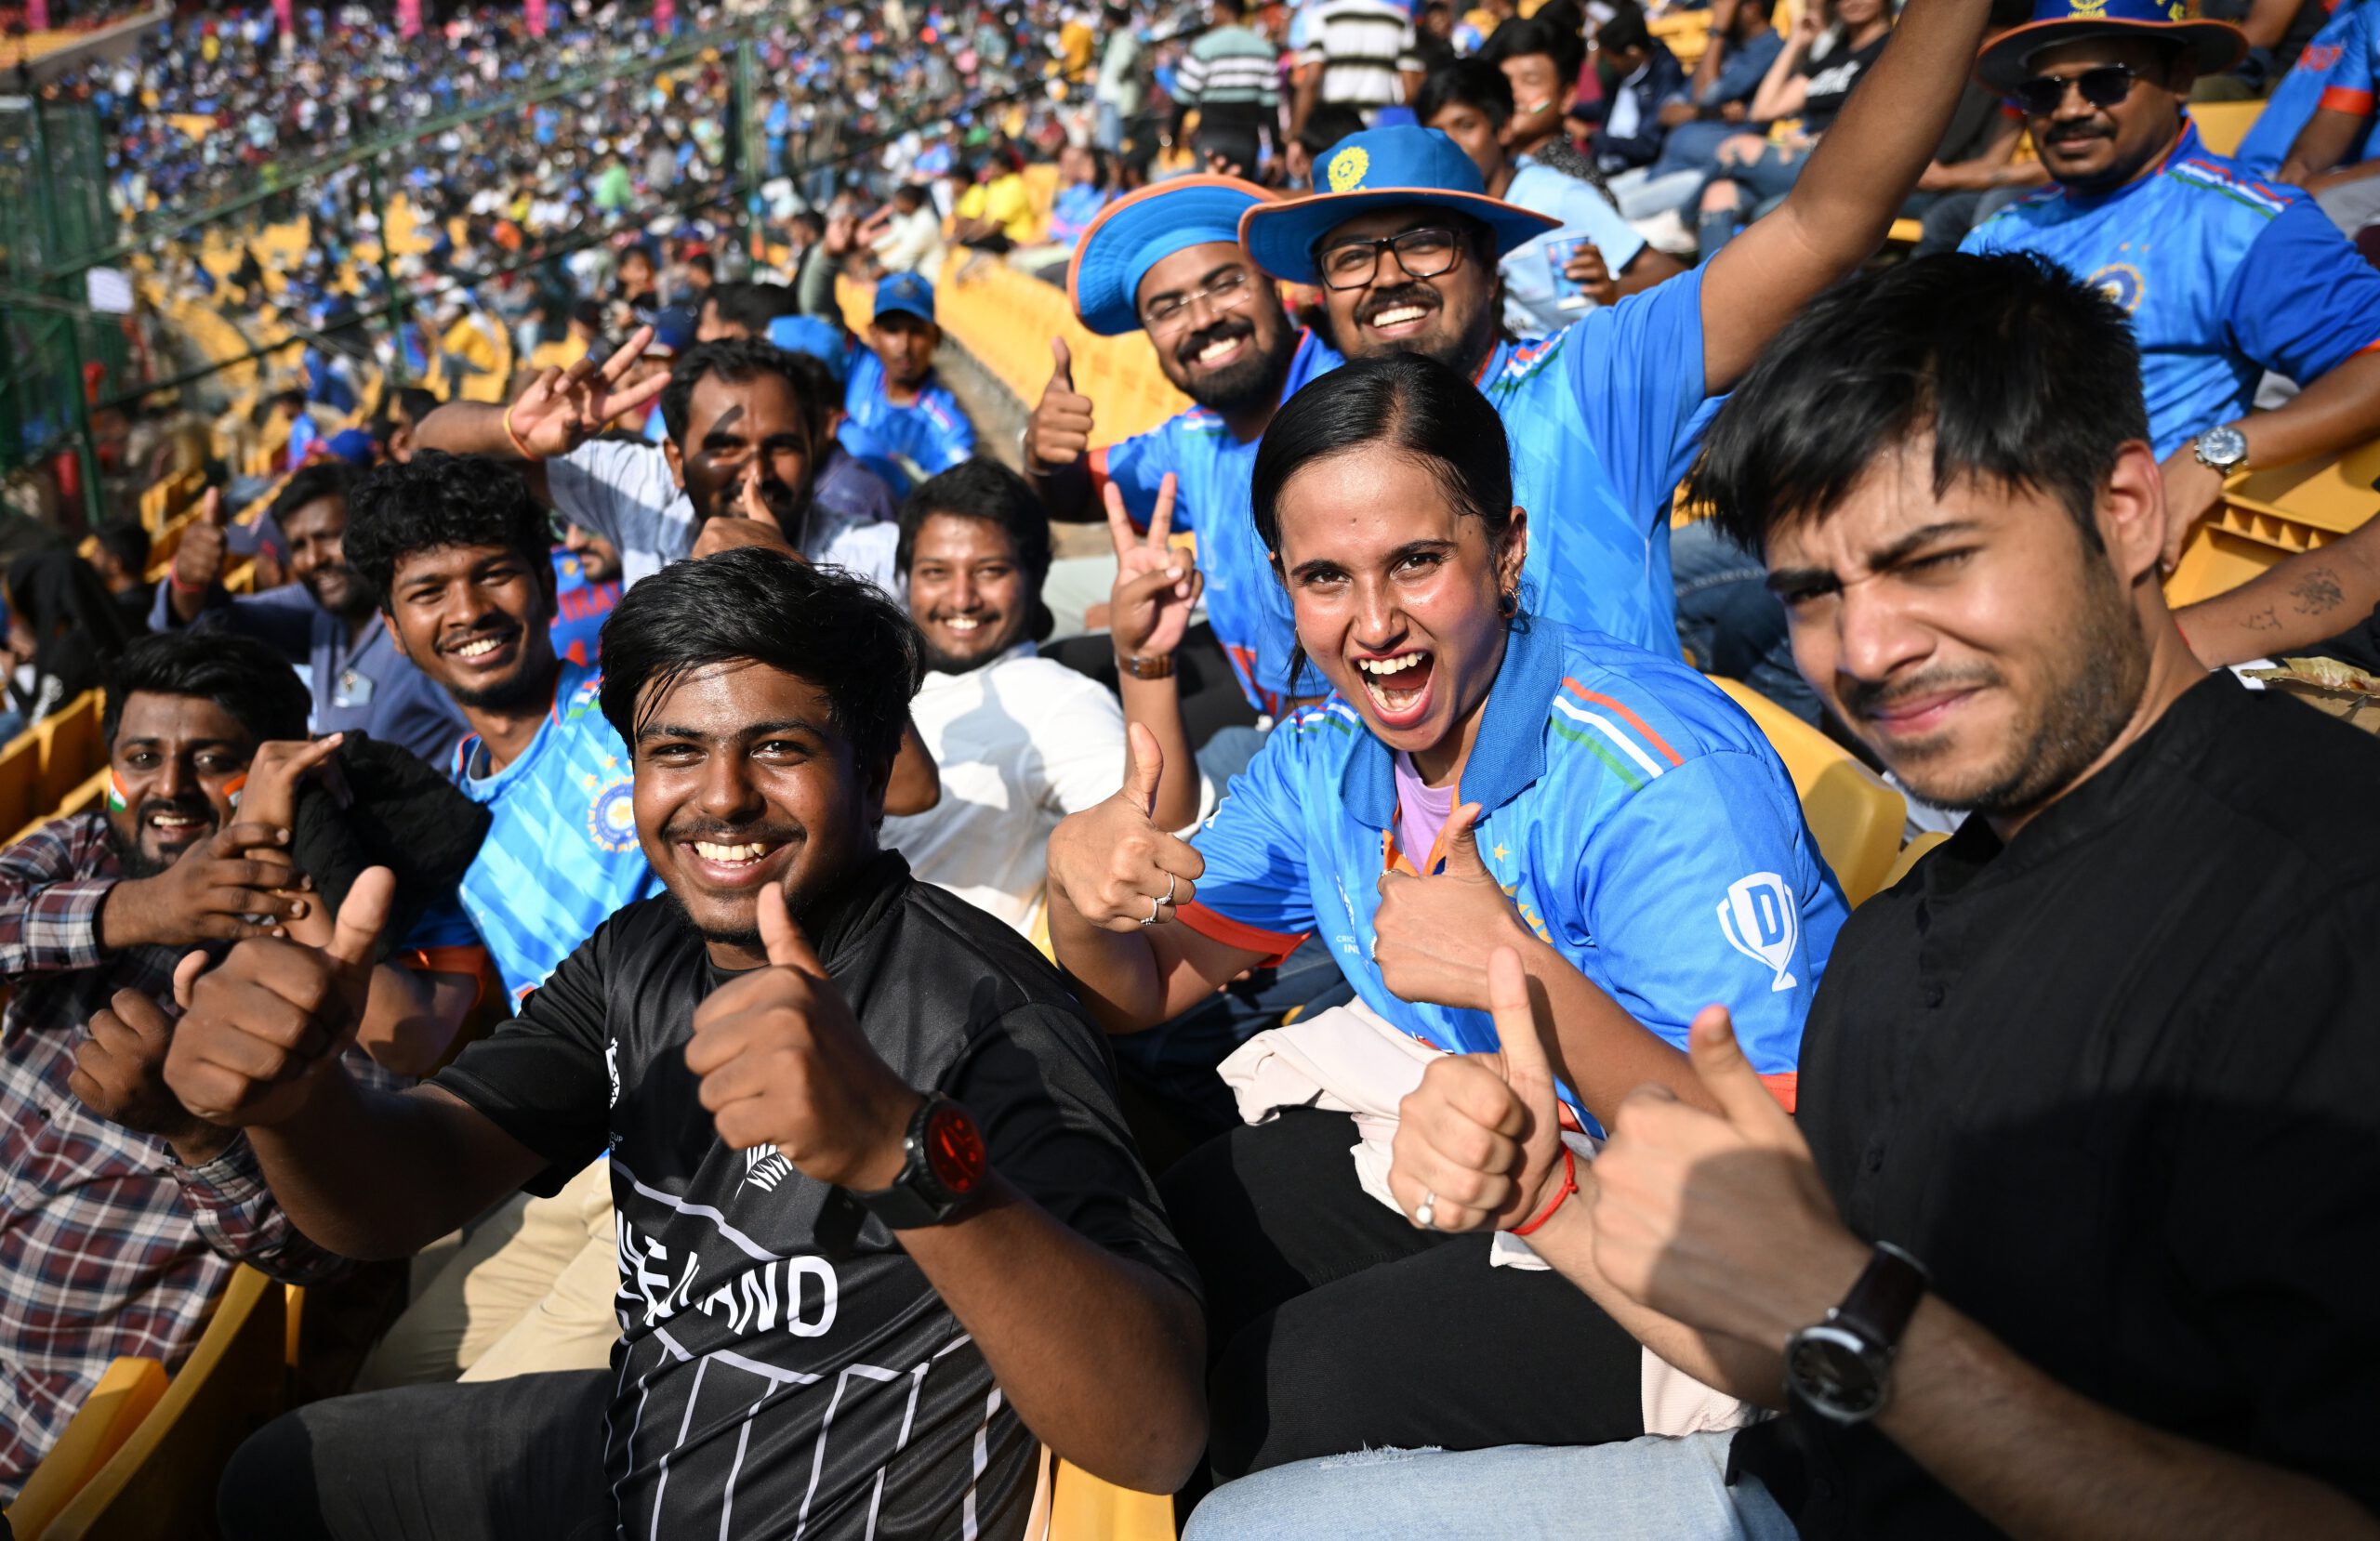 Spectators react in the crowd during the ICC Men's Cricket World Cup